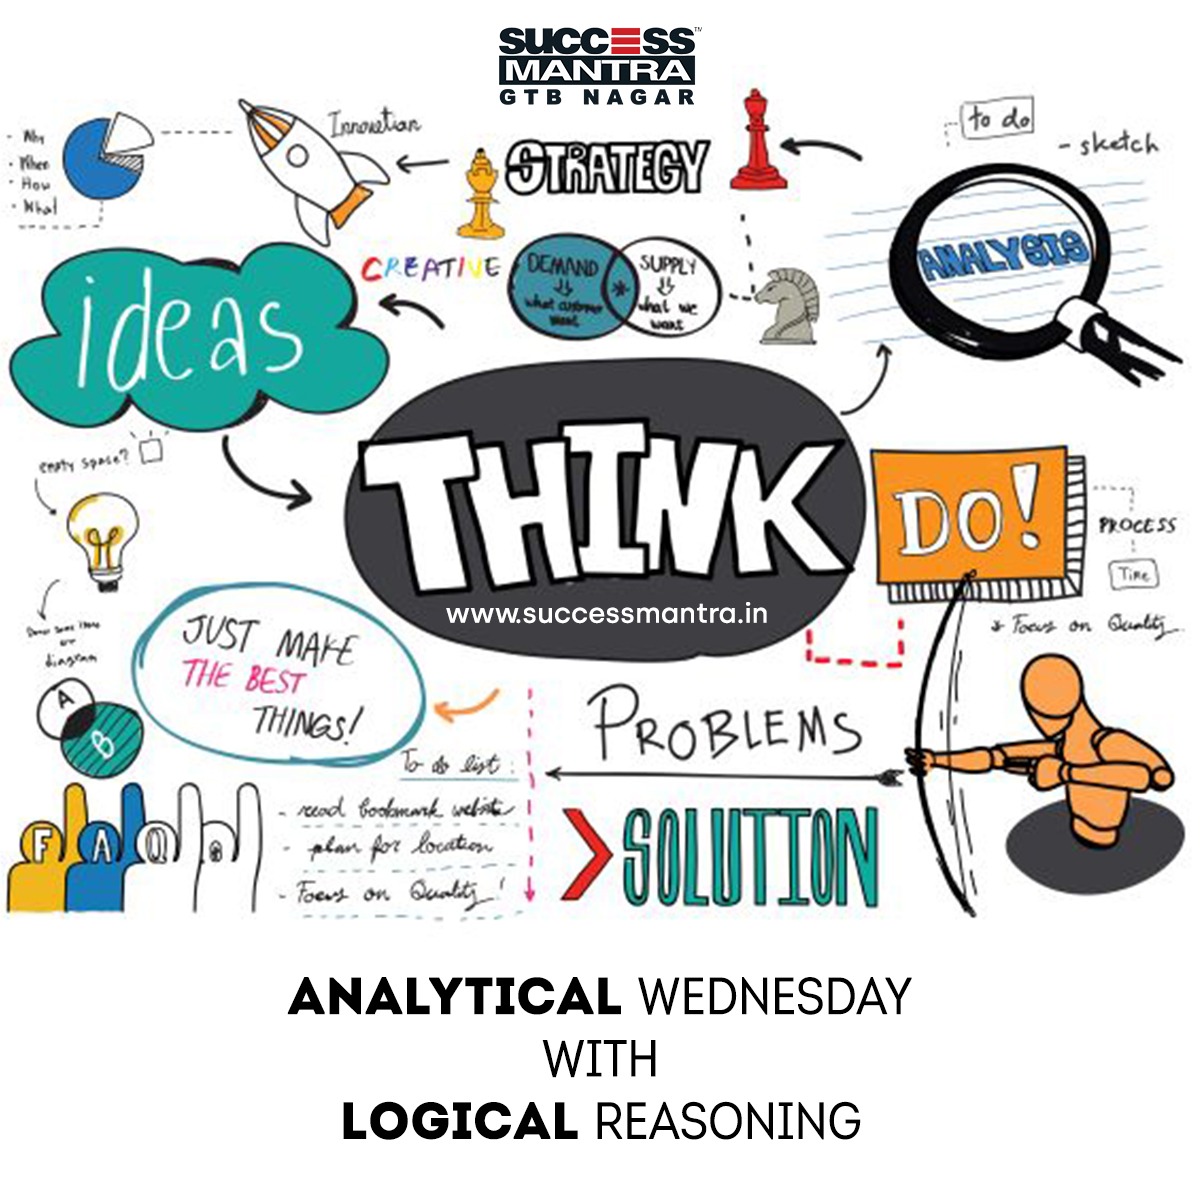 Questions on Logical Reasoning SMLRQ021